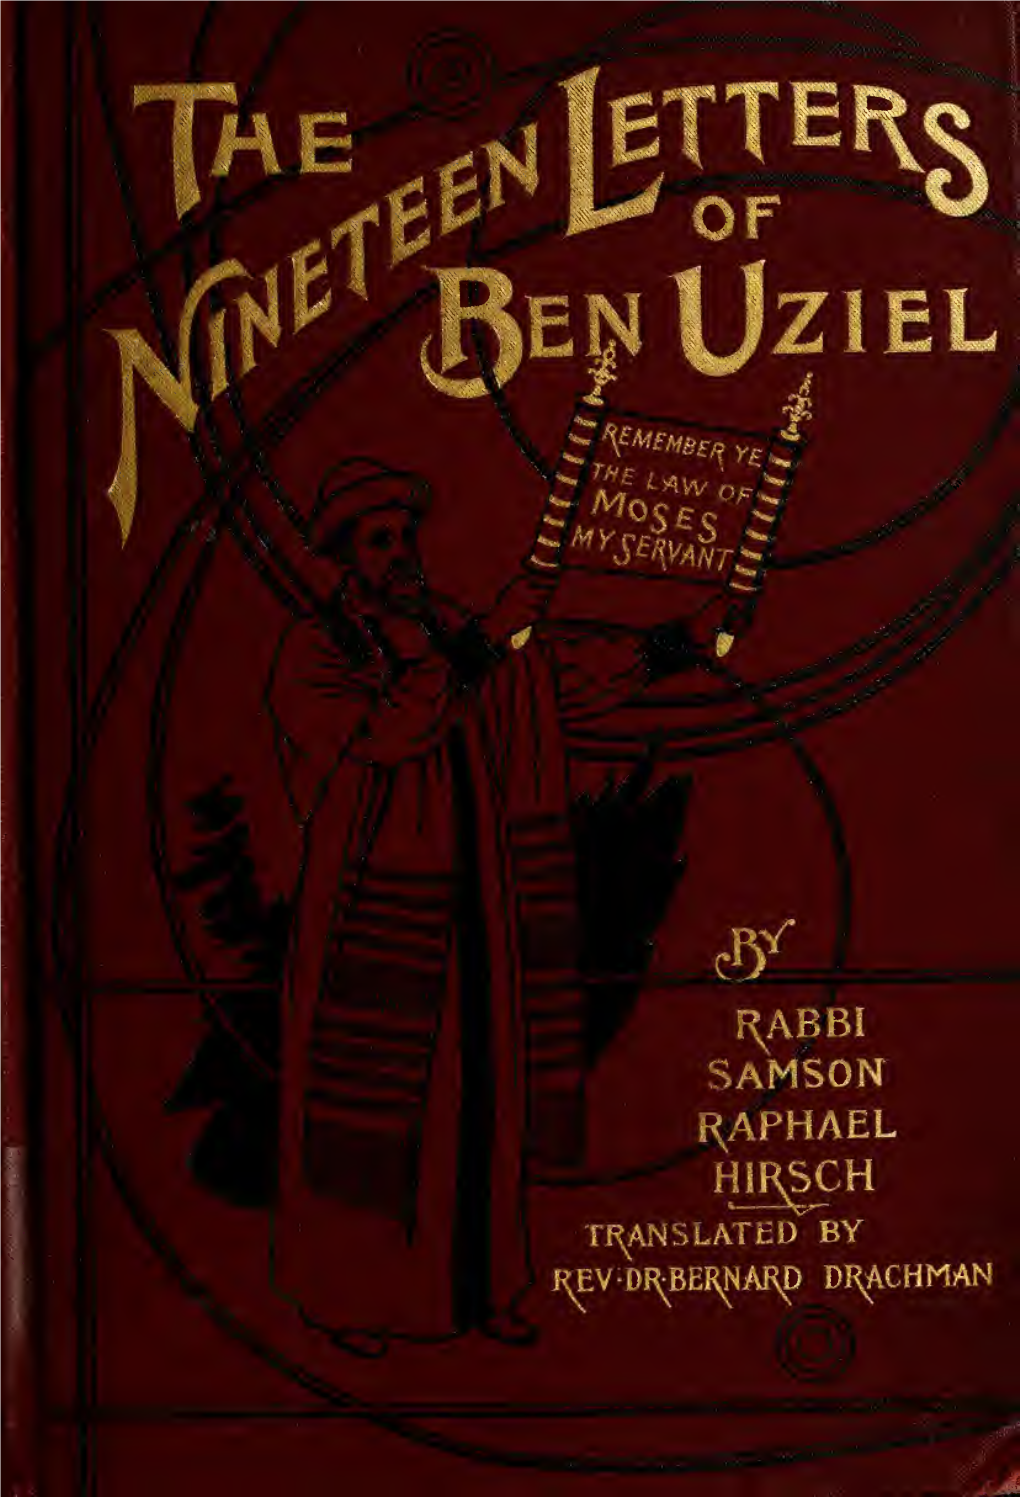 The Nineteen Letters of Ben Uziel, Being a Spiritual Presentation of The